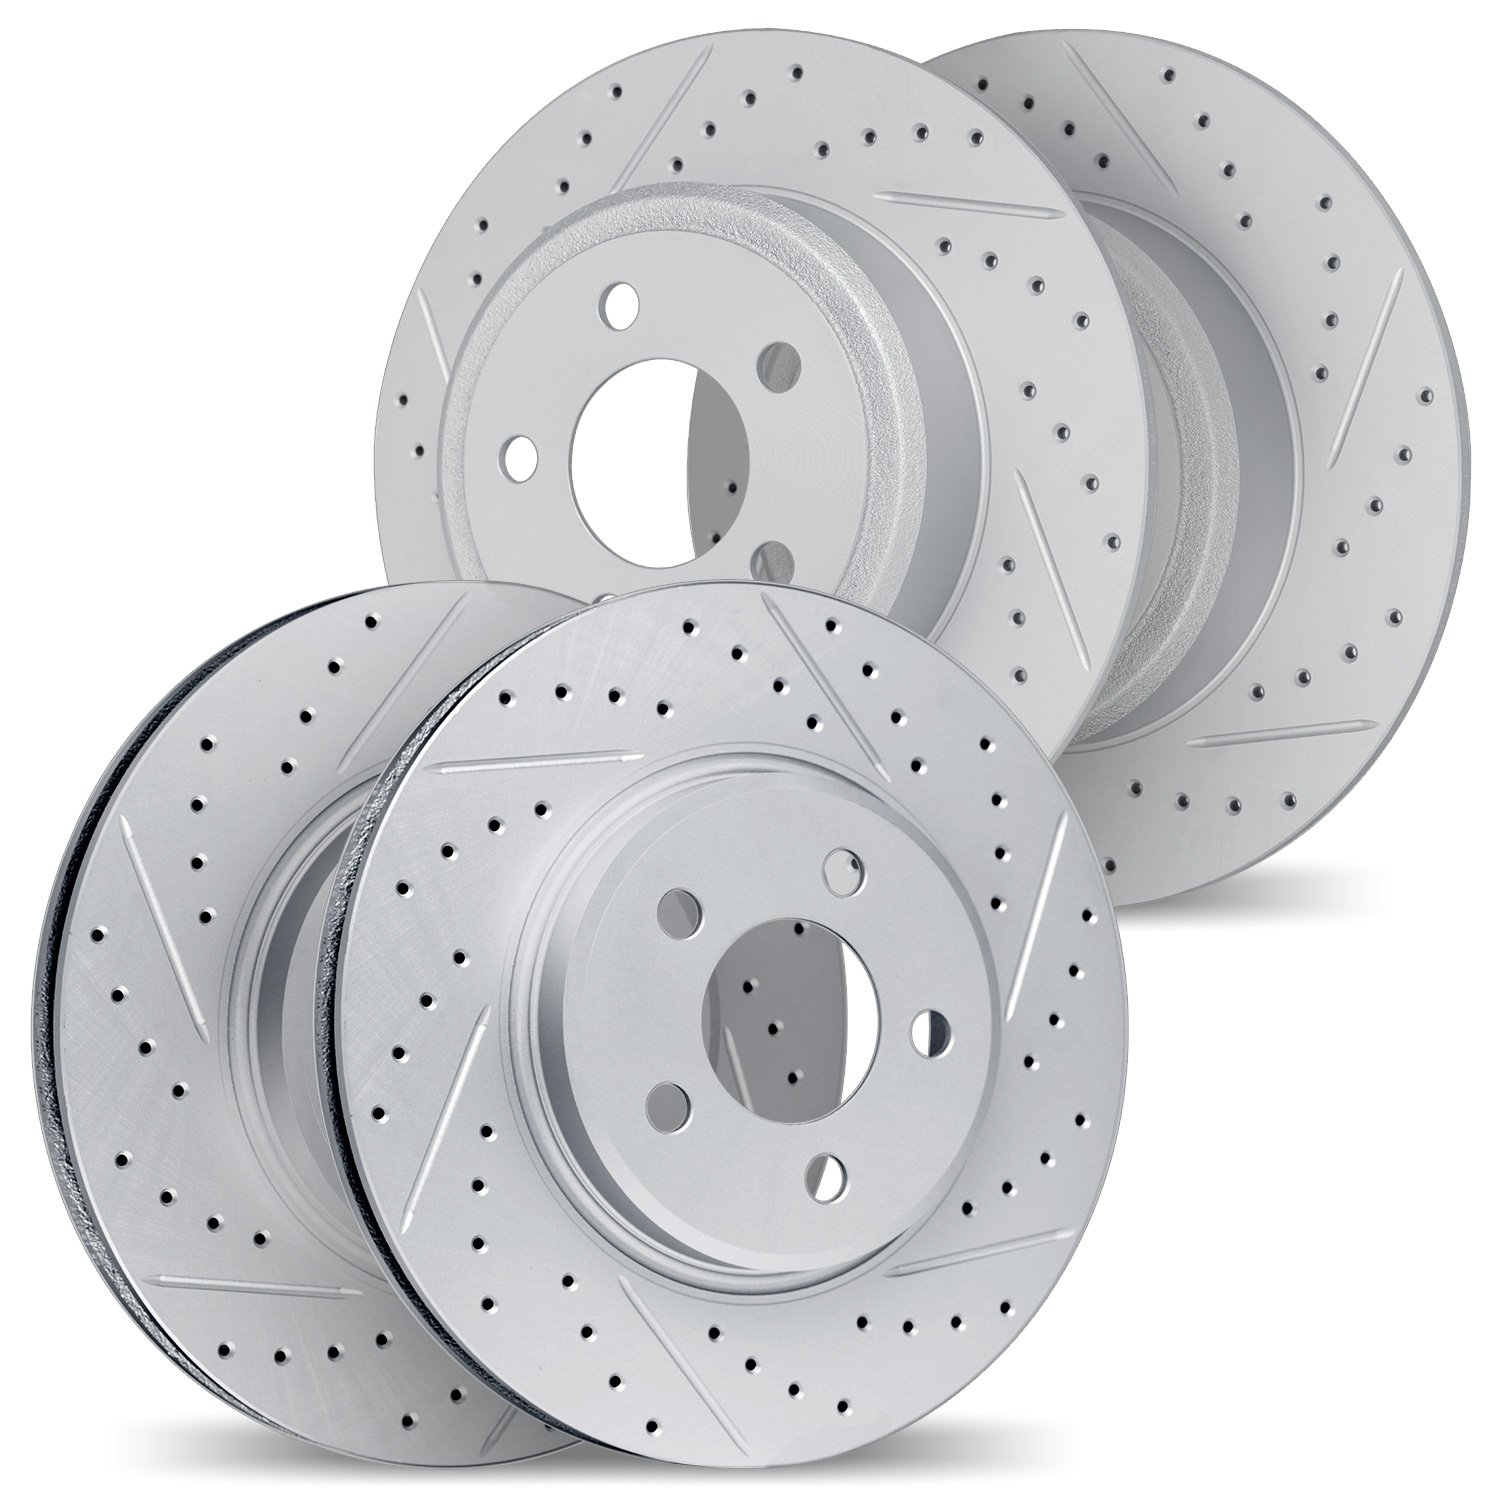 2004-67063 Geoperformance Drilled/Slotted Brake Rotors, 2007-2012 Infiniti/Nissan, Position: Front and Rear